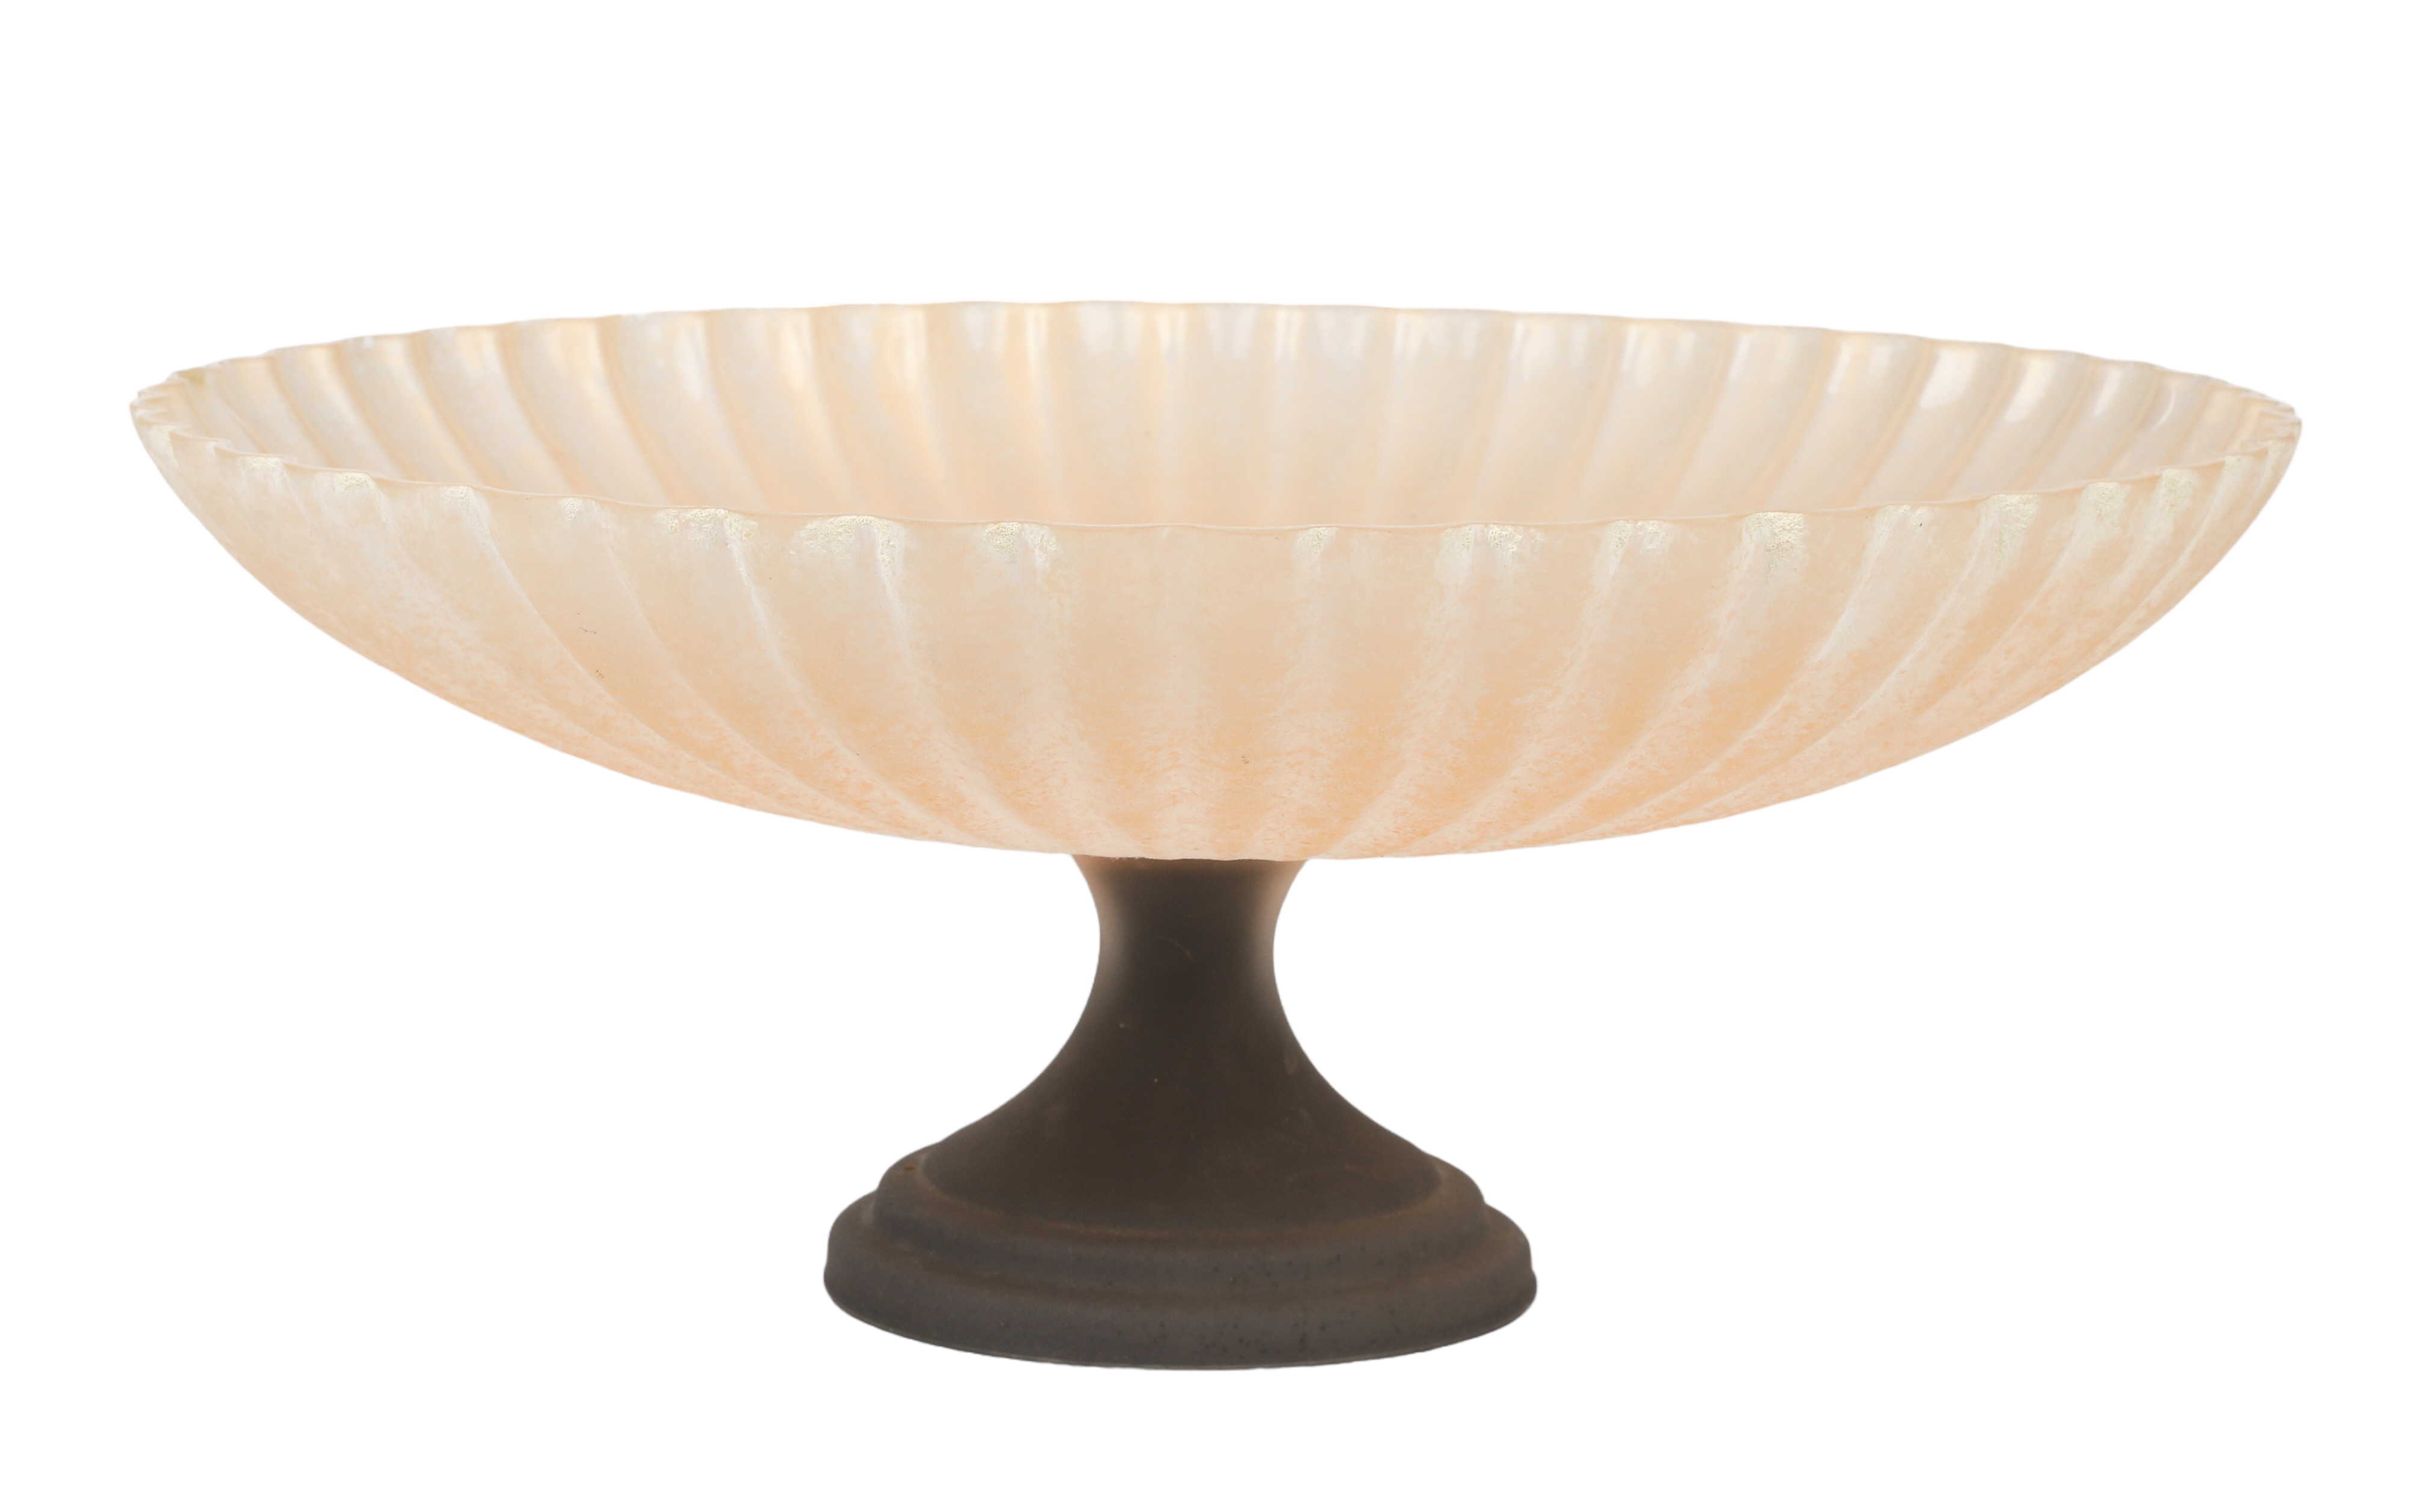 Large art glass compote, 13-3/4 dia